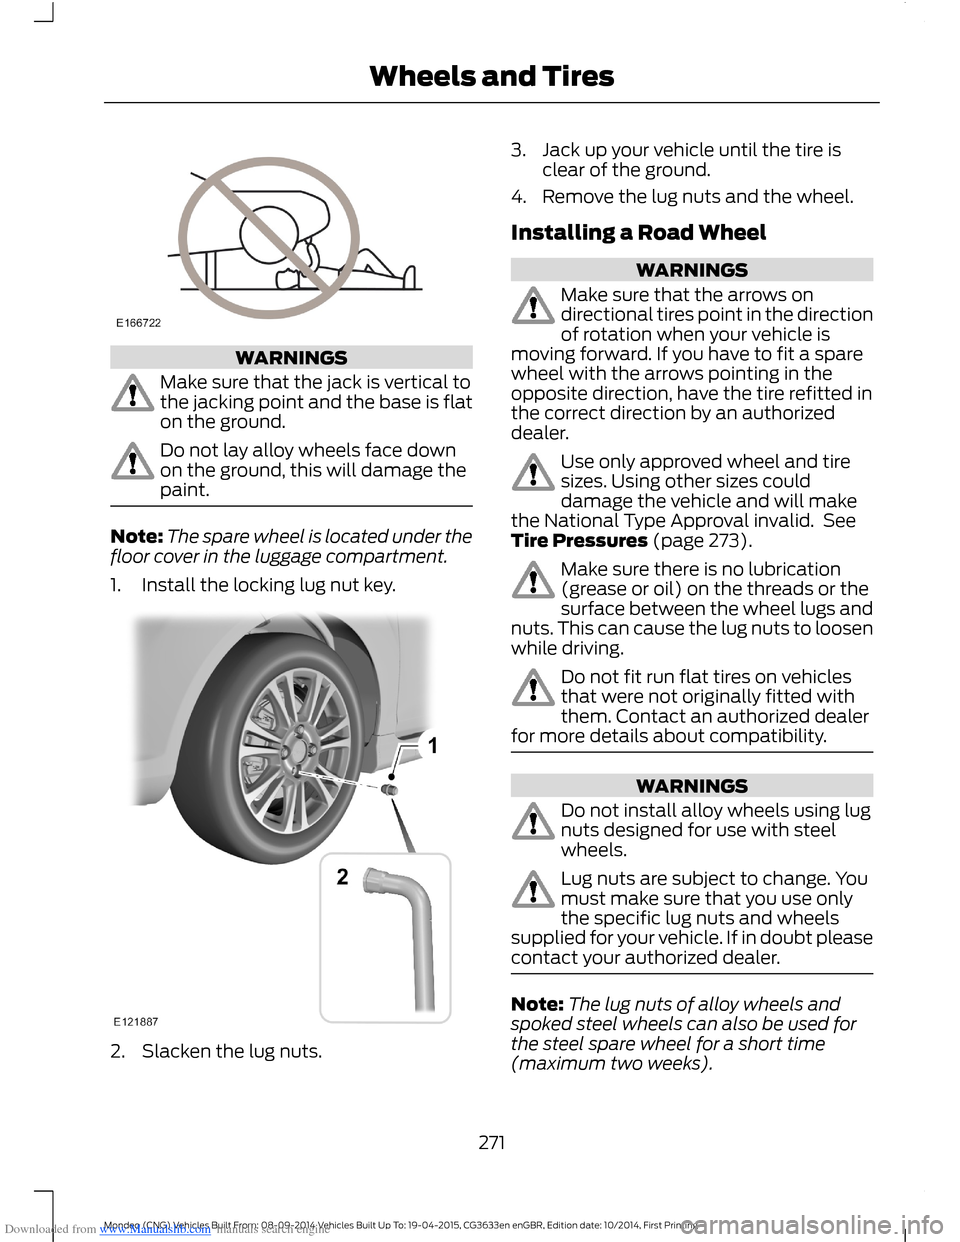 FORD MONDEO 2014 4.G User Guide Downloaded from www.Manualslib.com manuals search engine WARNINGS
Make sure that the jack is vertical tothe jacking point and the base is flaton the ground.
Do not lay alloy wheels face downon the gro